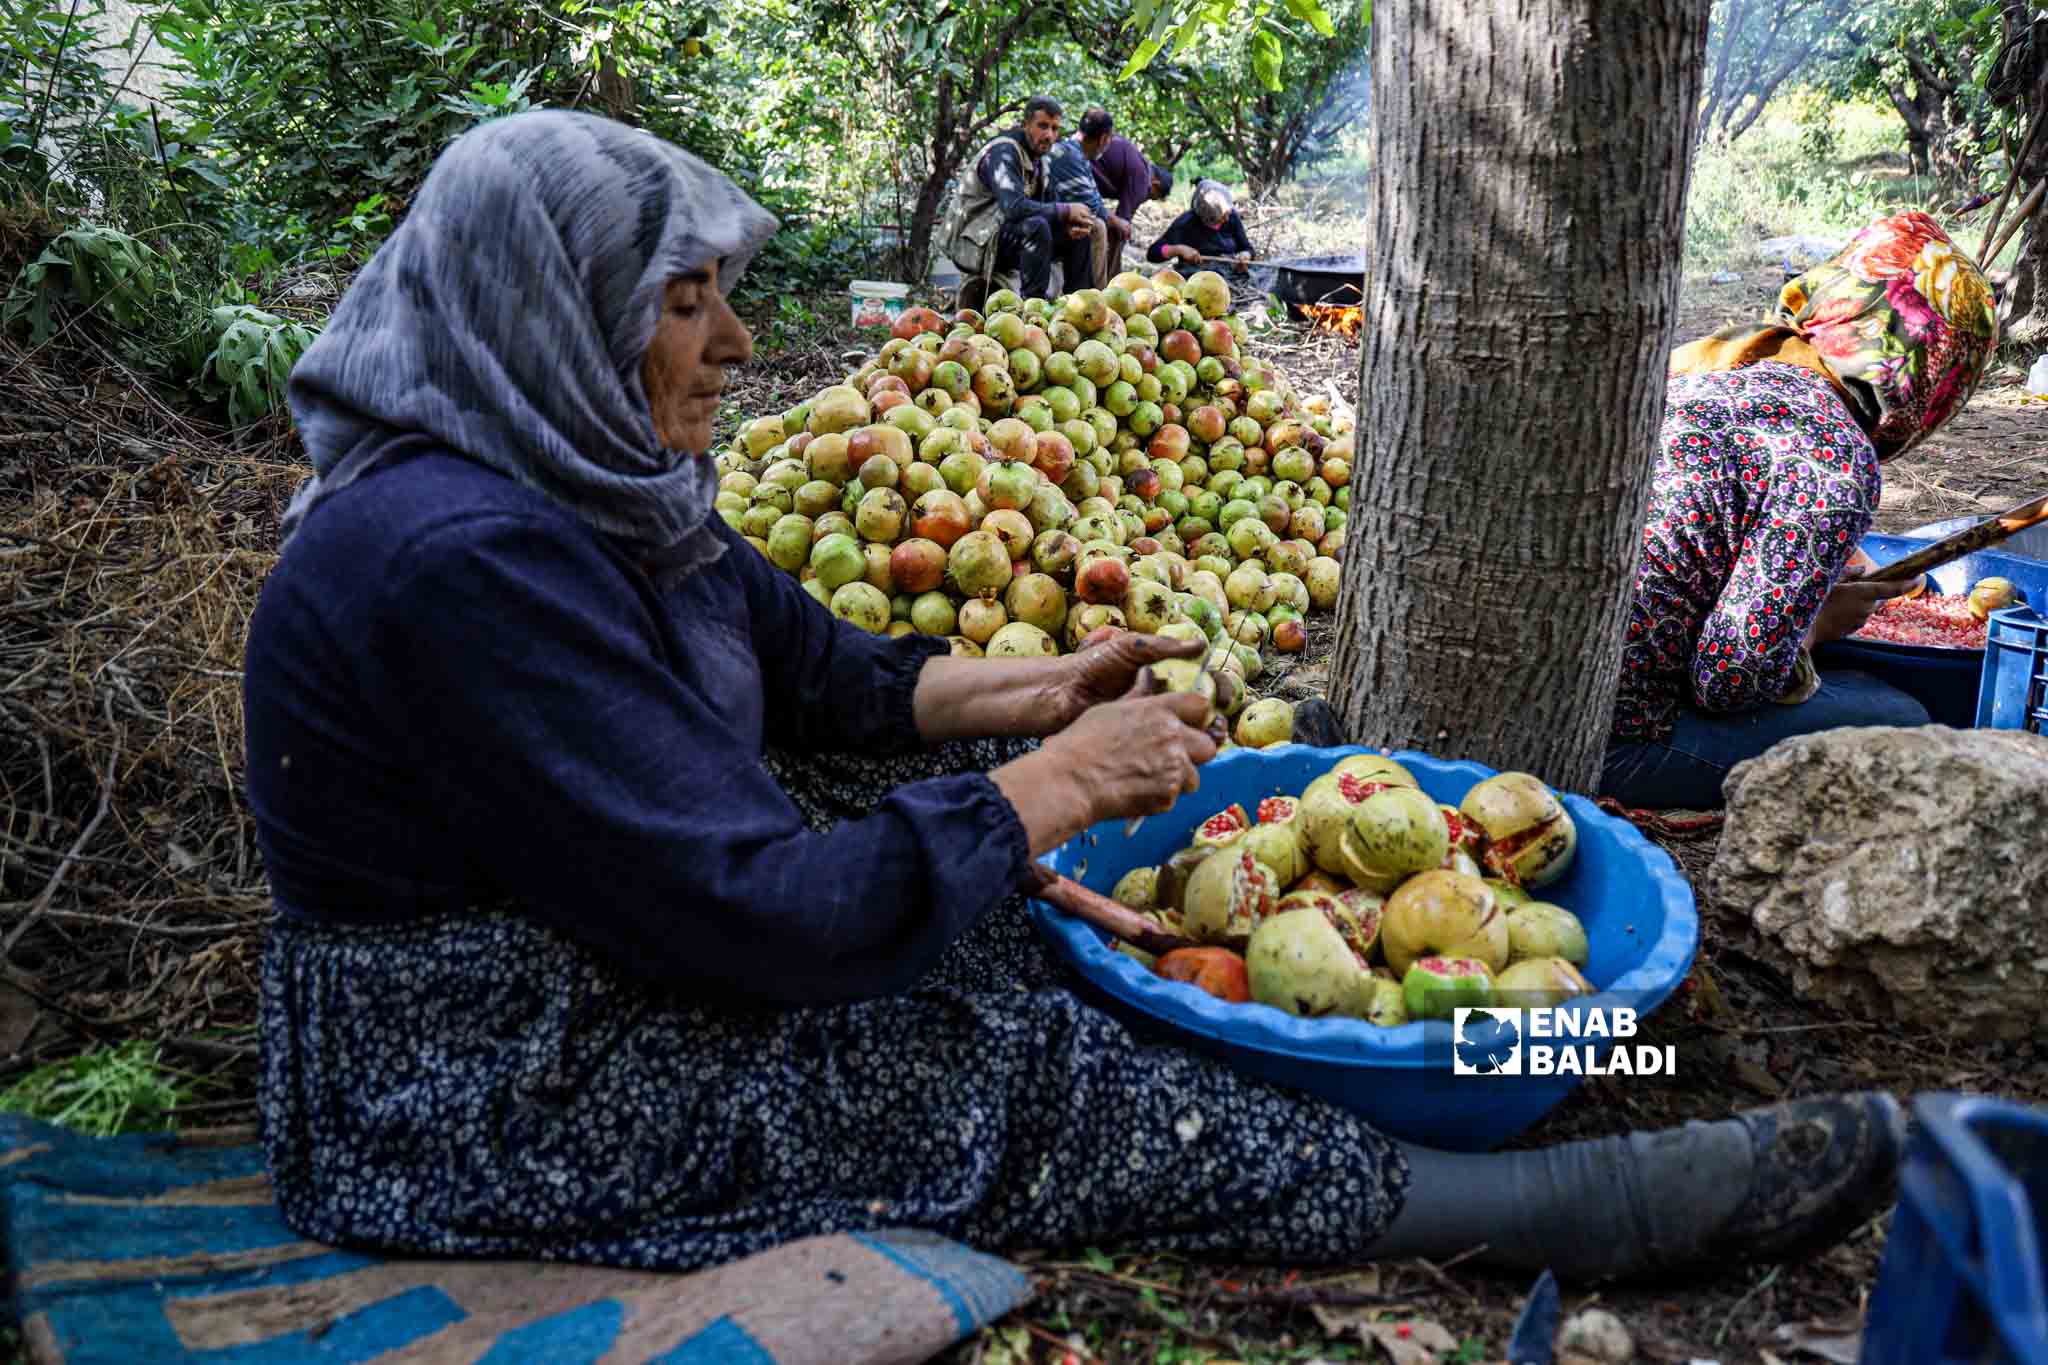 A woman cuts open pomegranates to use later in the making of molasses in Basoutah village in Afrin region, Aleppo countryside - 18 October 2022 (Enab Baladi / Amir Kharboutli)
